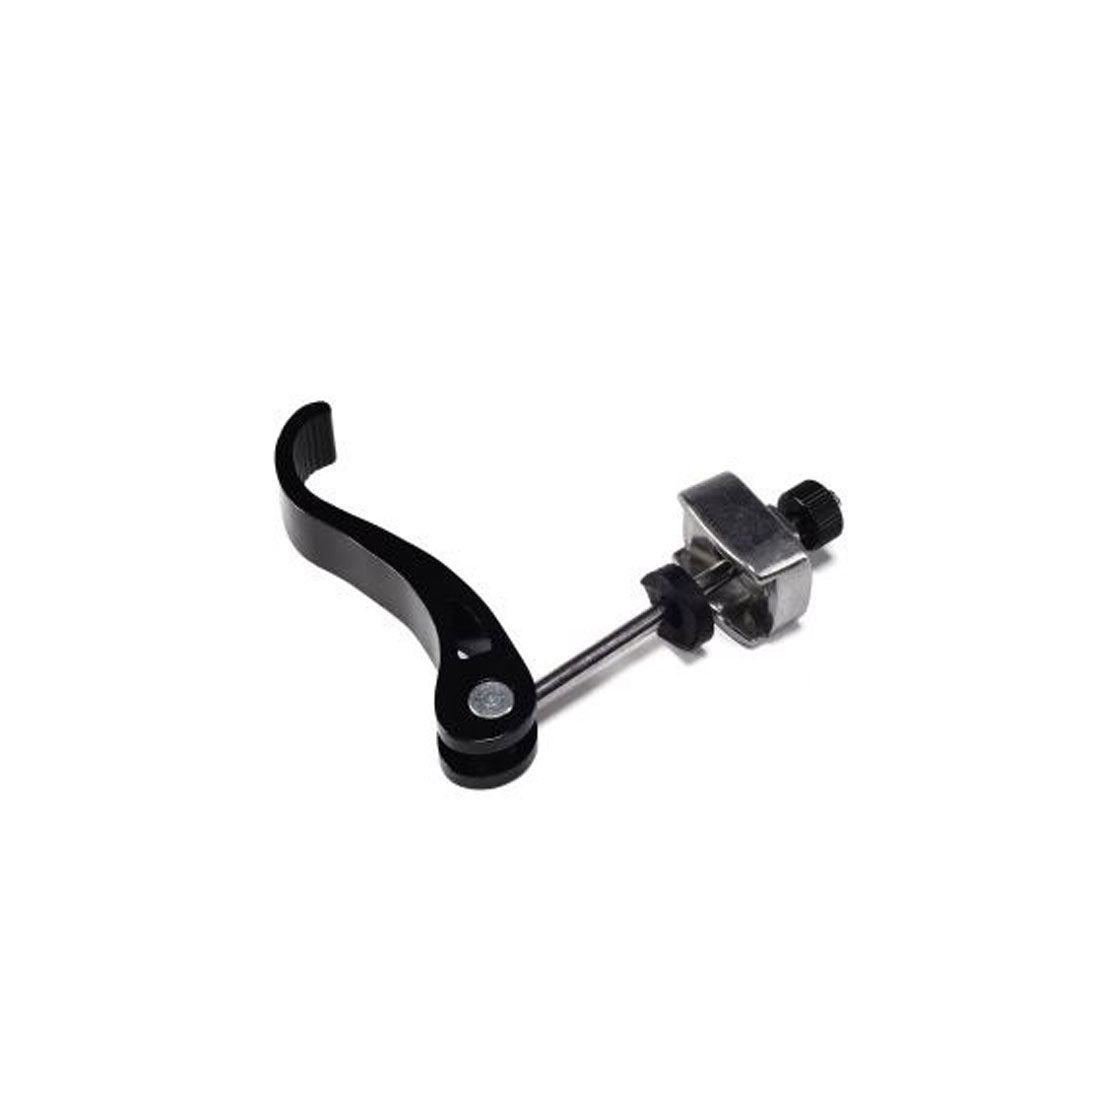 Micro Suspension Locking System - 3127 Scooter Hardware and Parts